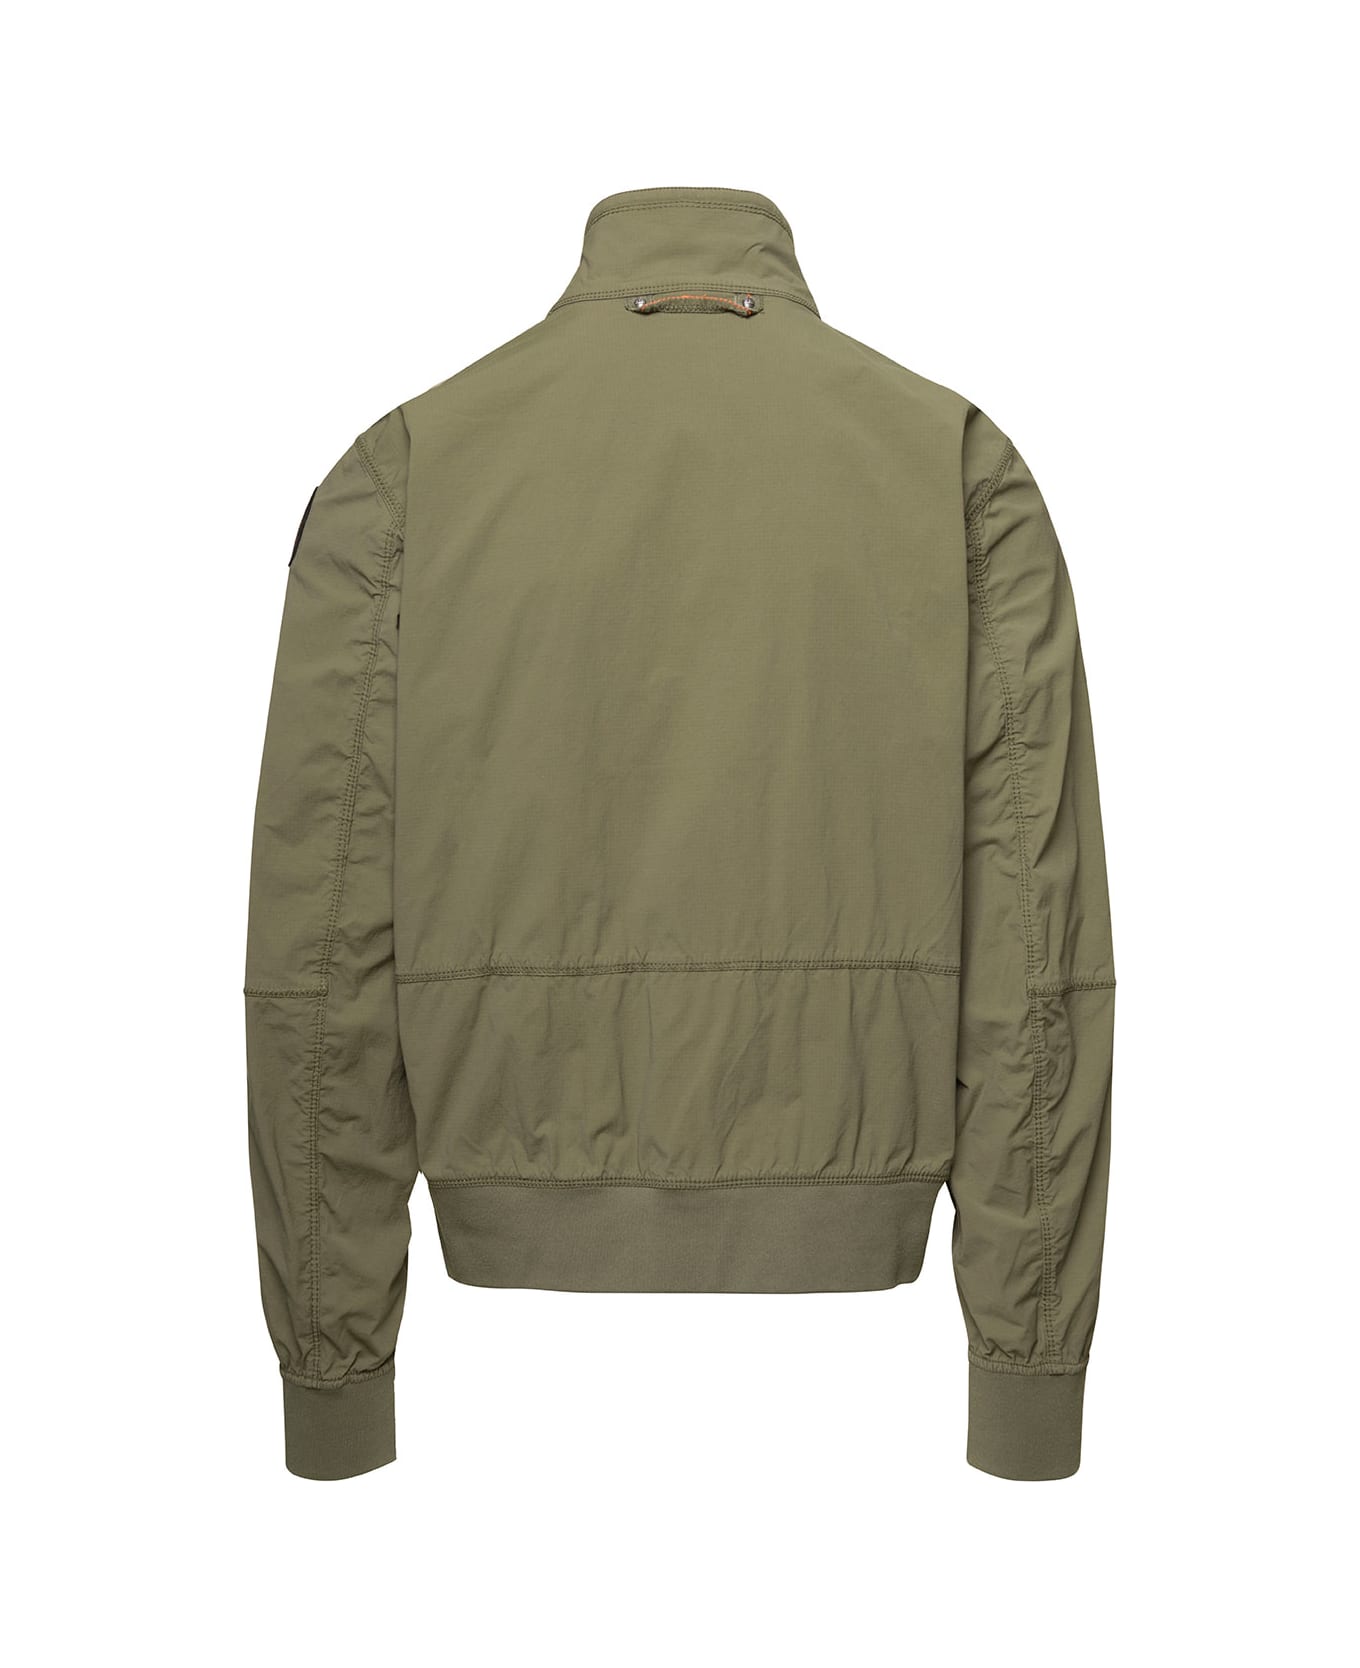 Parajumpers 'desert' Military Green High Neck Jacket With Patch Pocket In Cotton Blend Man - Green